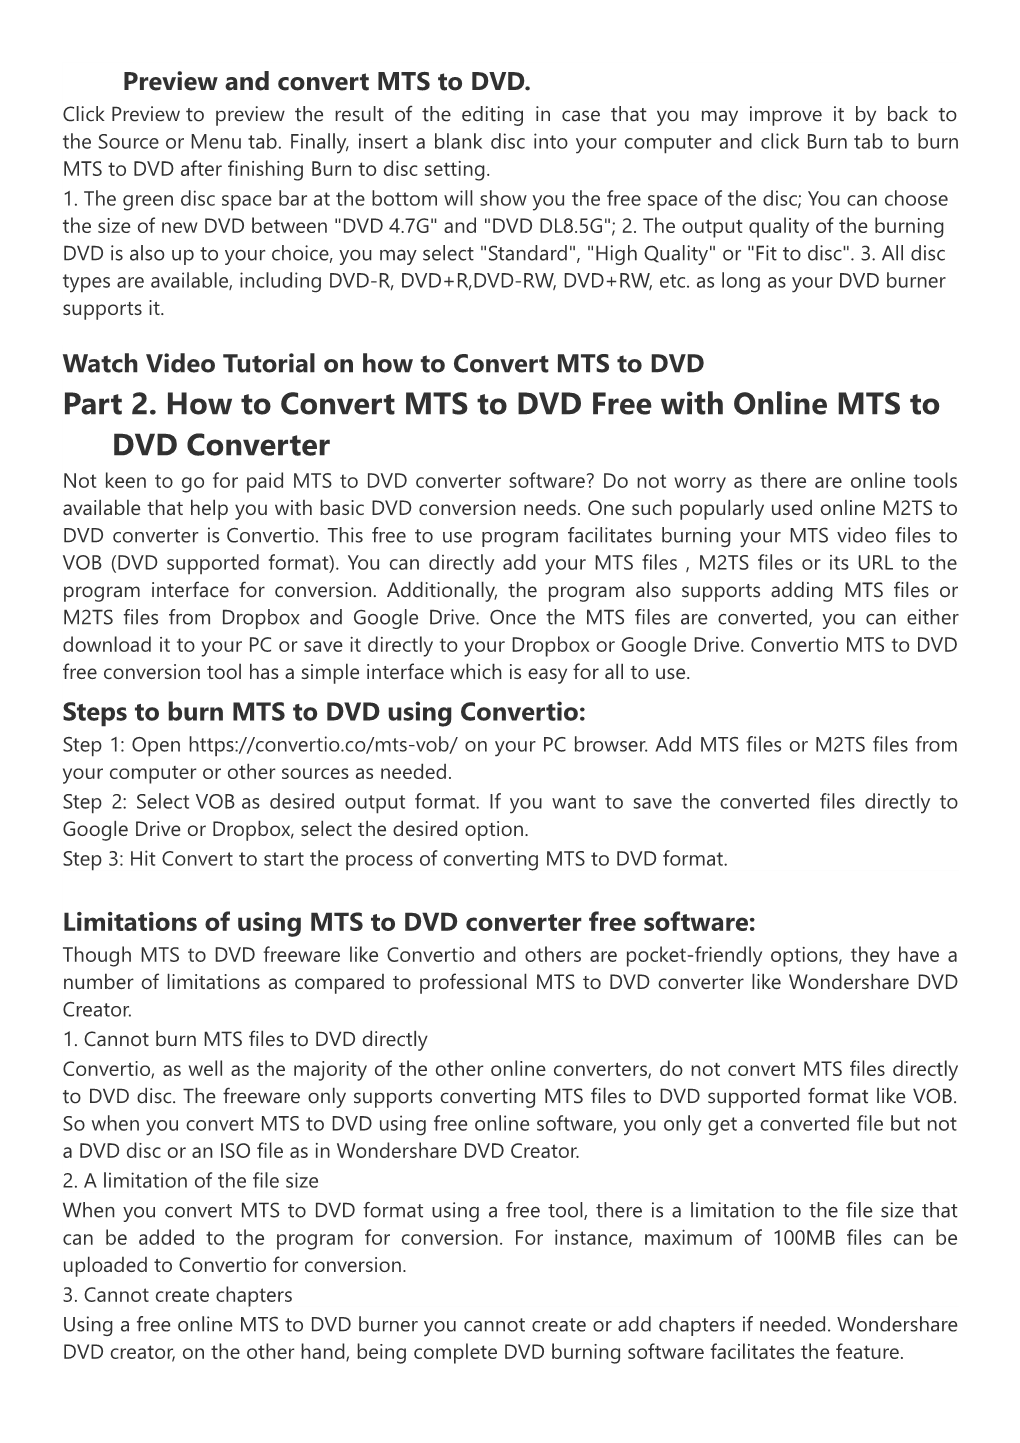 How to Convert MTS to DVD or M2TS to DVD Without Any Hassle